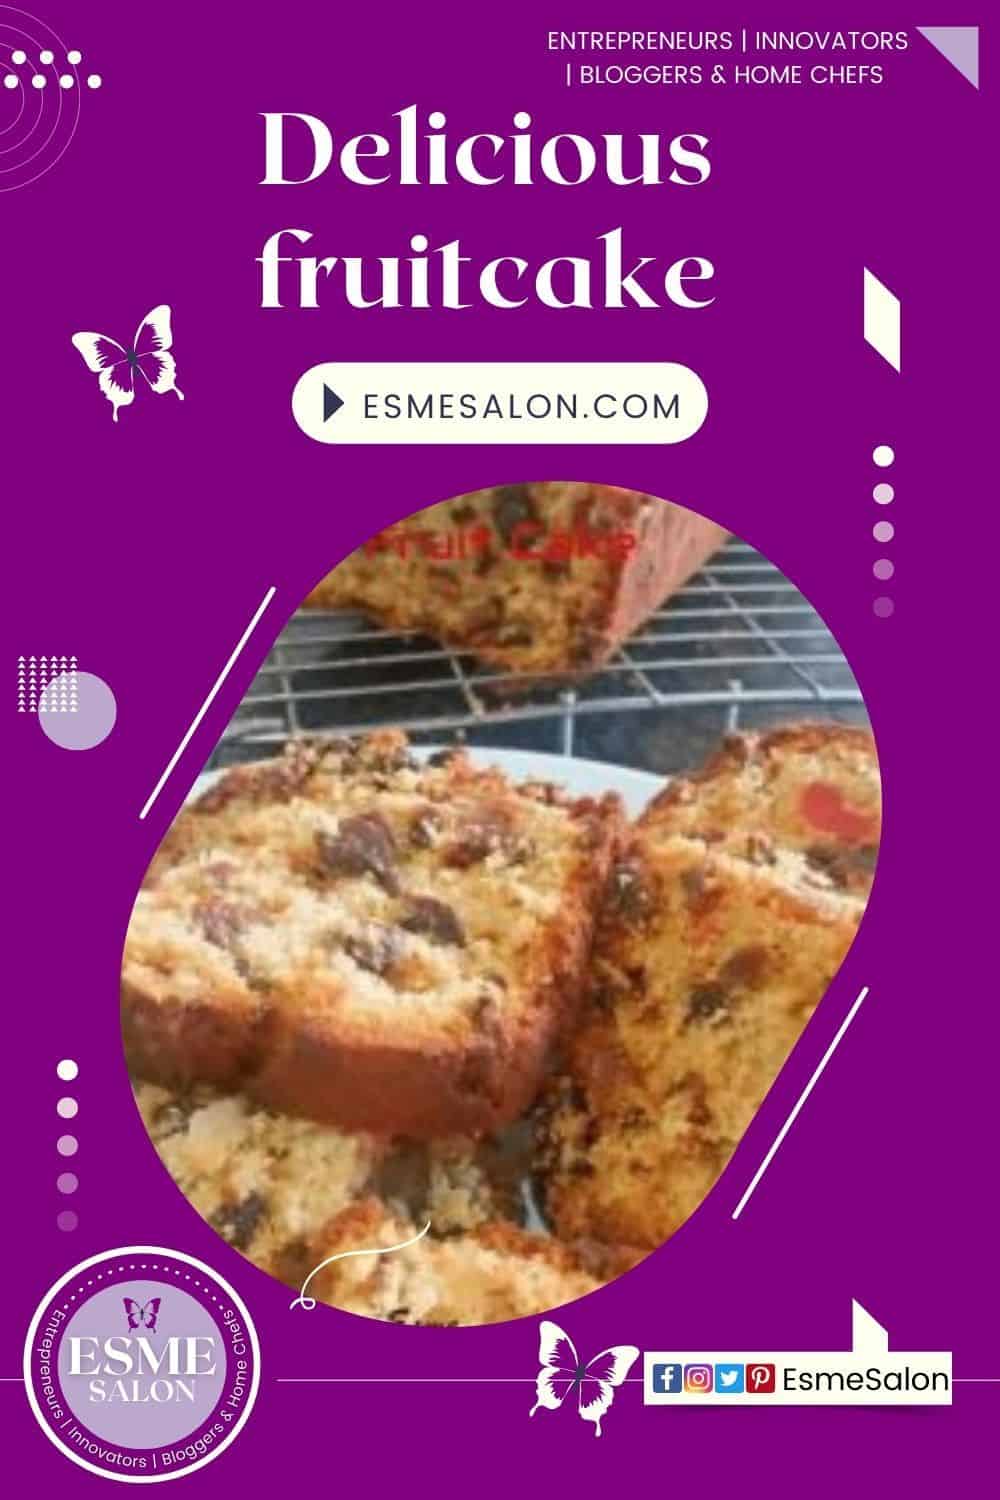 An image of slices of Delicious fruitcake made with dried fruit on a cooling wire rack